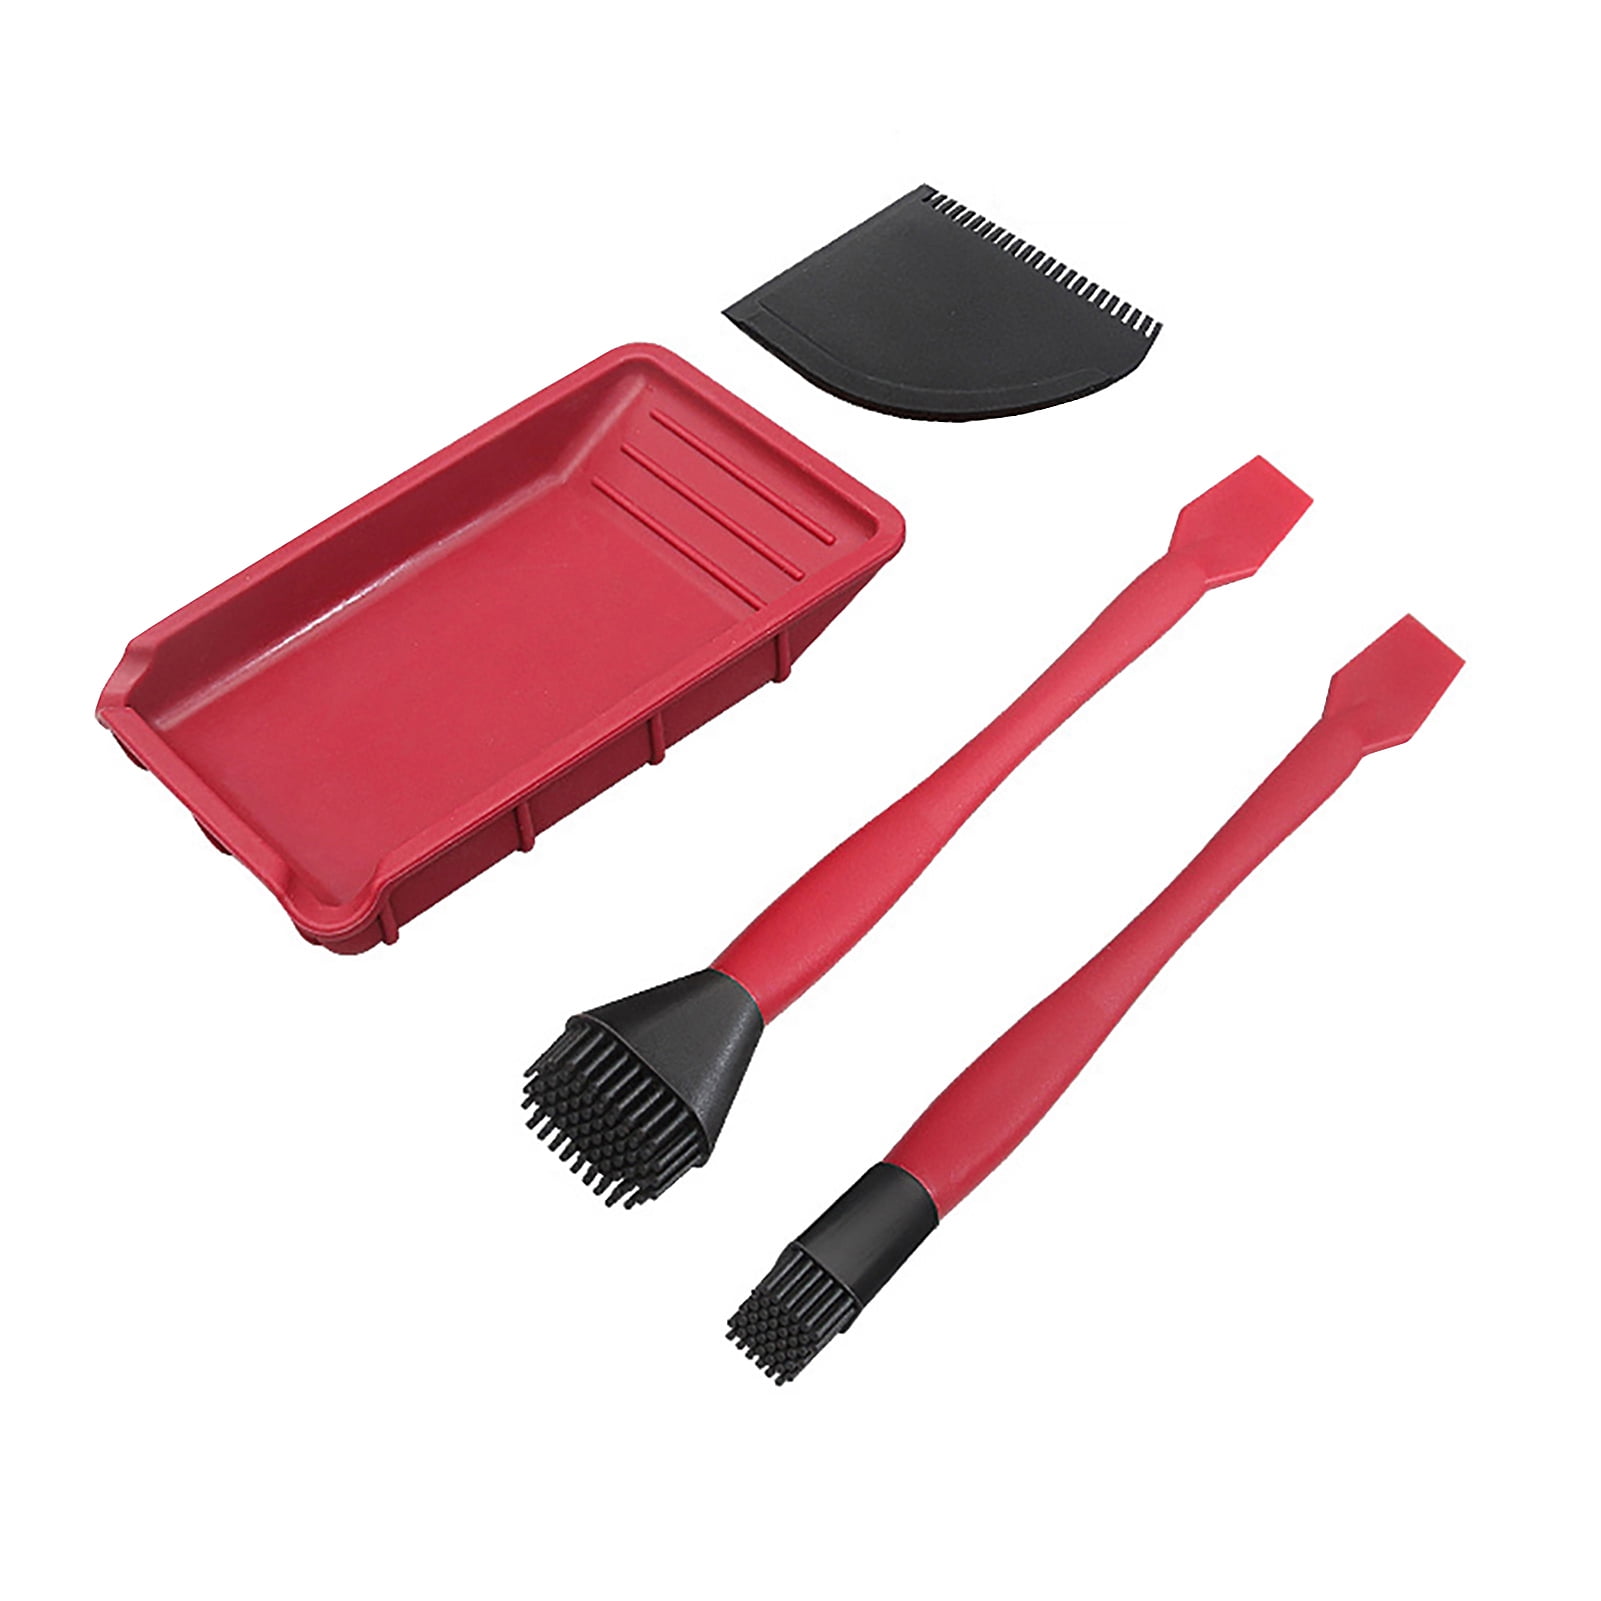 Complete Silicone Glue Kit, Silicone Polypropylene Wood Glue Up 4 Piece  Kit, Wood Glue Up Brushes Tray Comb School Gluing Spreader Applicator Set